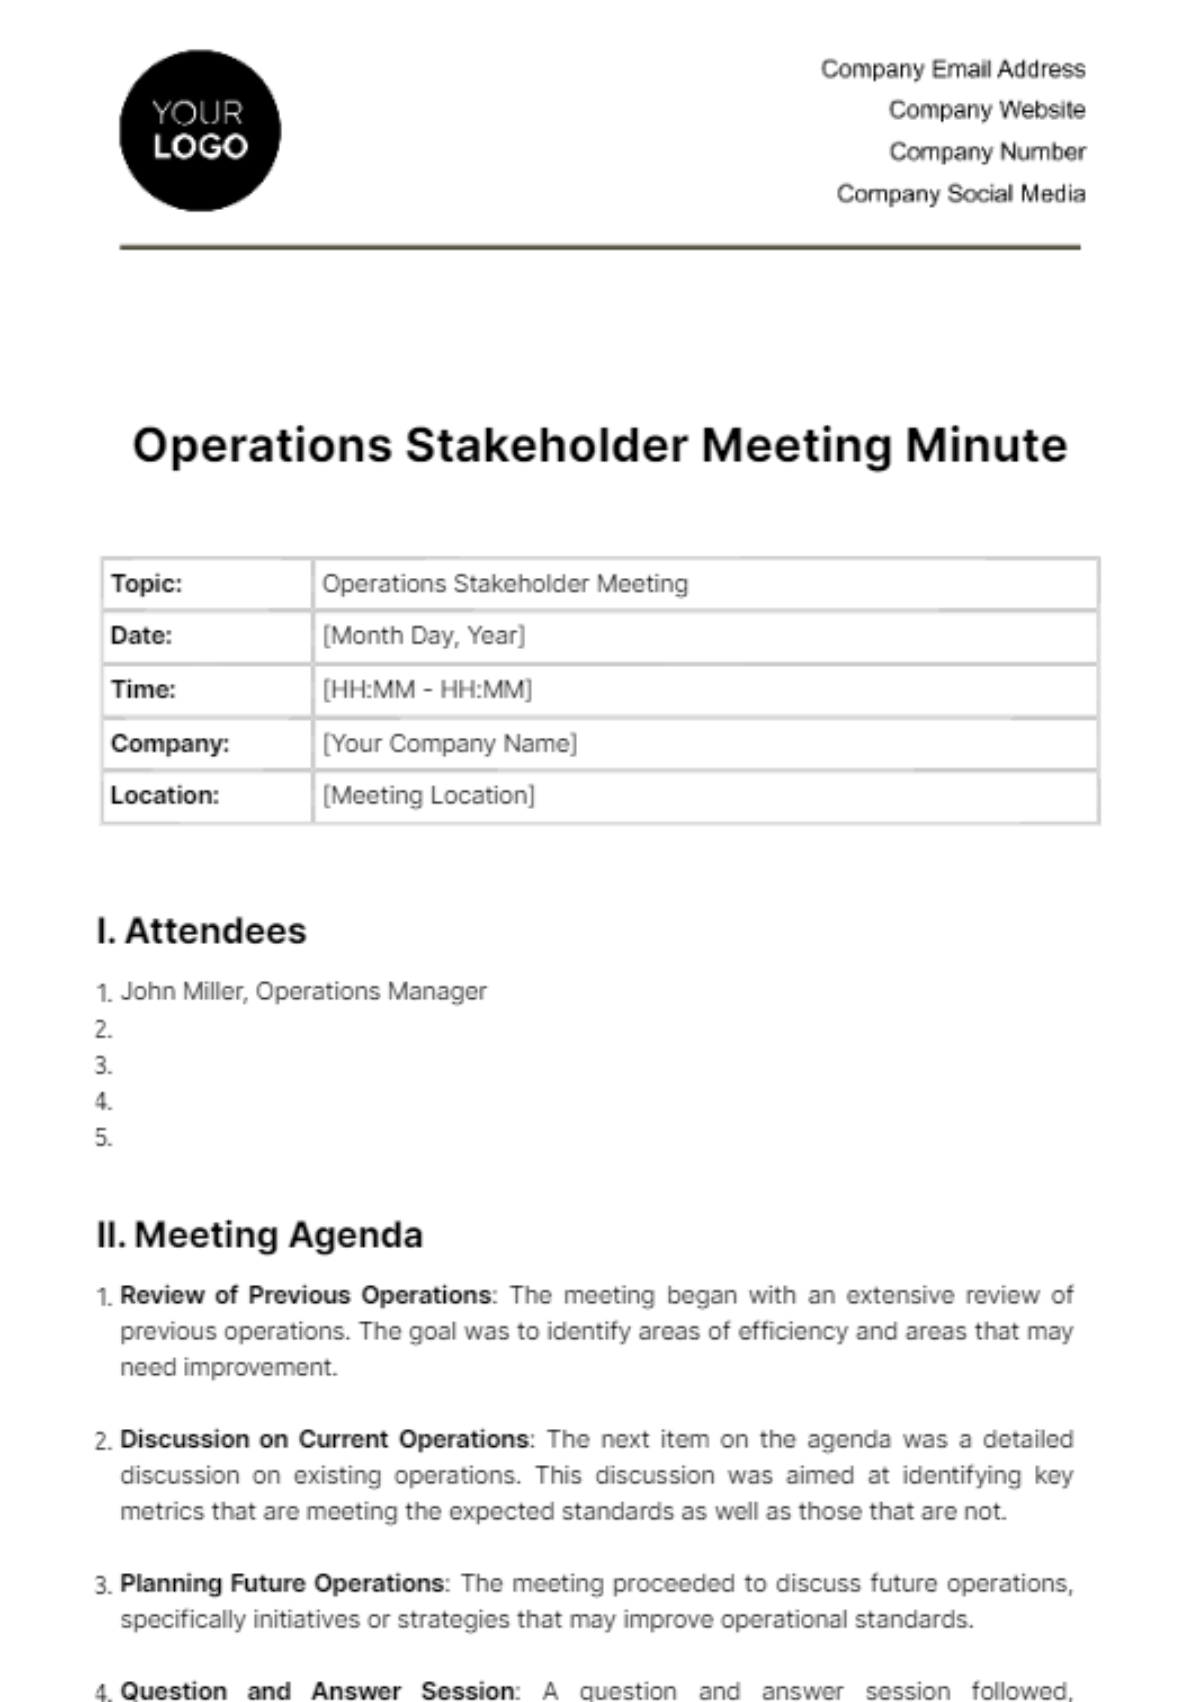 Free Operations Stakeholder Meeting Minute Template